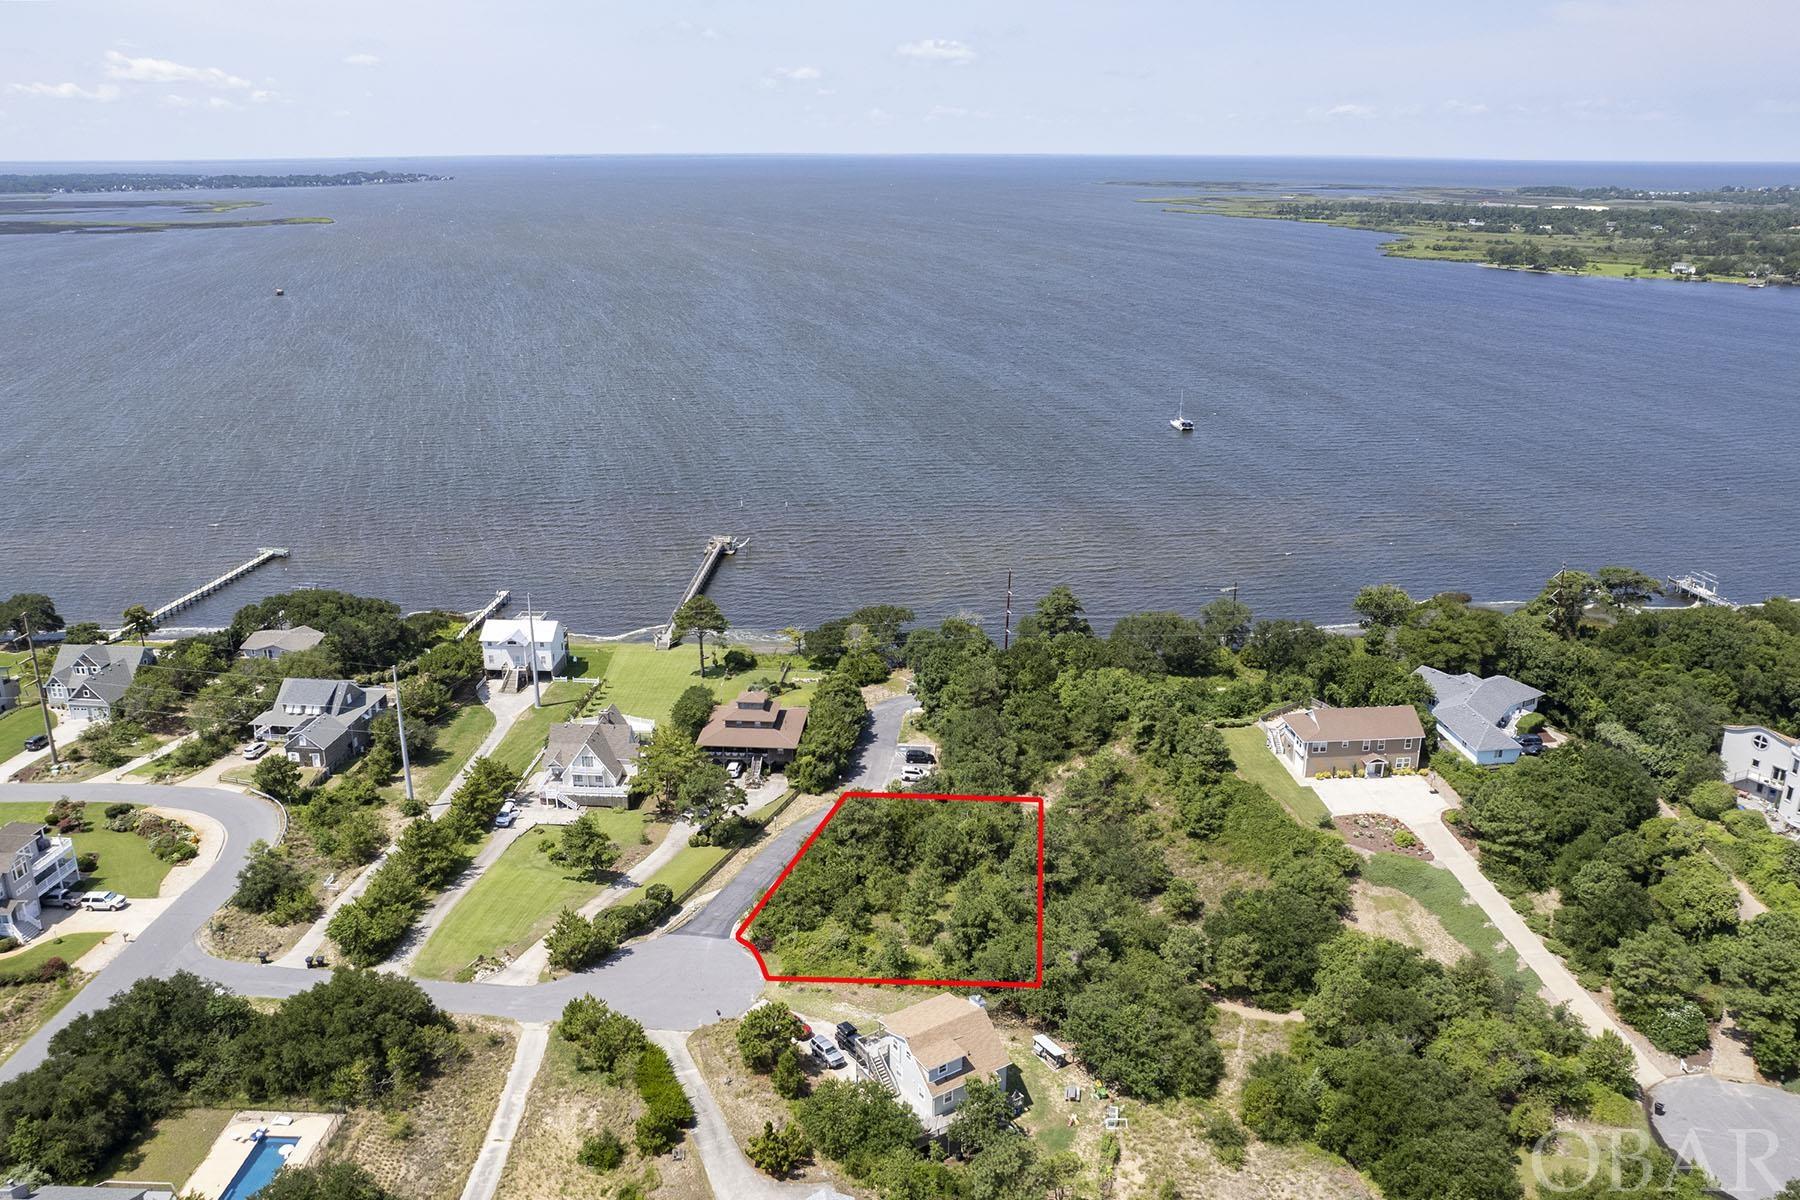 LOCATION! Build your dream home with amazing sunset and sound views in this incredible location in an elevated cul-de-sac off of Bay Drive! The Town of Kitty Hawk owns the land between this lot and the sound so no home will be built between your home and the water! This 17,500 sqft lot sits high and dry in the X flood zone. There is a town maintained public soundfront gazebo and water access literally steps down the street. It's the best of both worlds. You get to have amazing sound views, while having someone else maintain the sound access! There is a 5-bedroom septic site review on file. The Bay Drive area has a multi-use walking/biking path that runs along the sound for miles; it's a popular neighborhood for living, investing and sunset gazing. Close to the beach, shops and restaurants. This is an opportunity that doesn't come along very often. It is a gem of a location in a sought-after neighborhood.